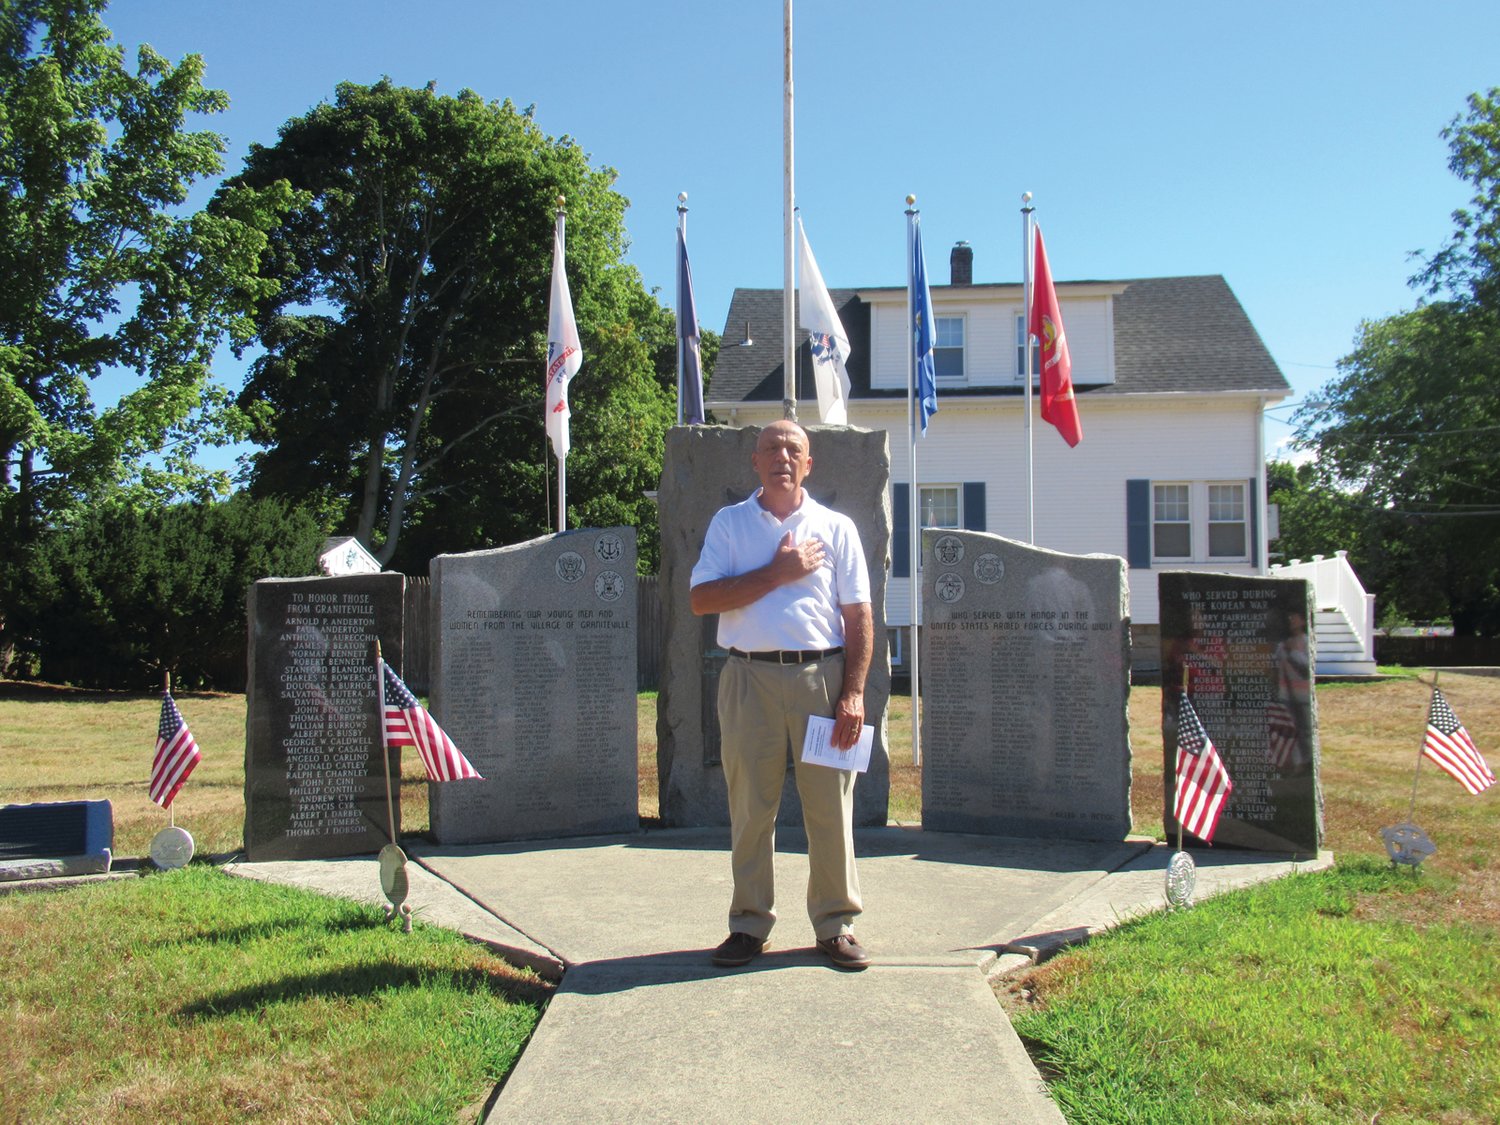 PROUD PLEDGE: Anthony Carlino, a long-time member of the Graniteville Veterans Foundations, leads the Pledge of Allegiance in front of the memorial off Putnam Pike in Johnston.